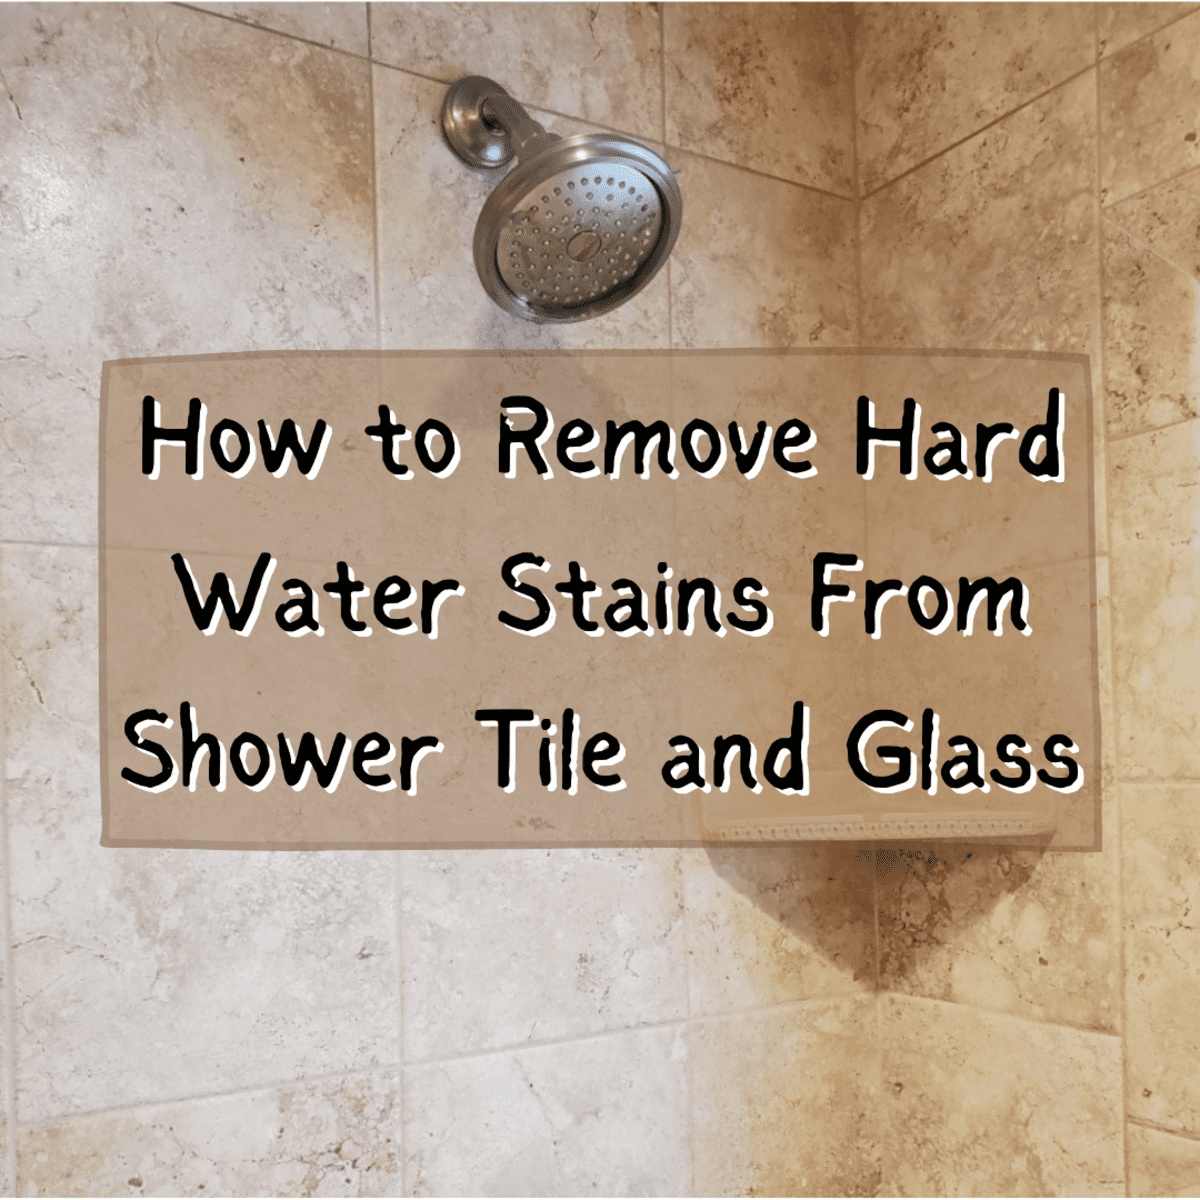 How to Remove Hard Water Stains From Shower Tile and Glass - Dengarden